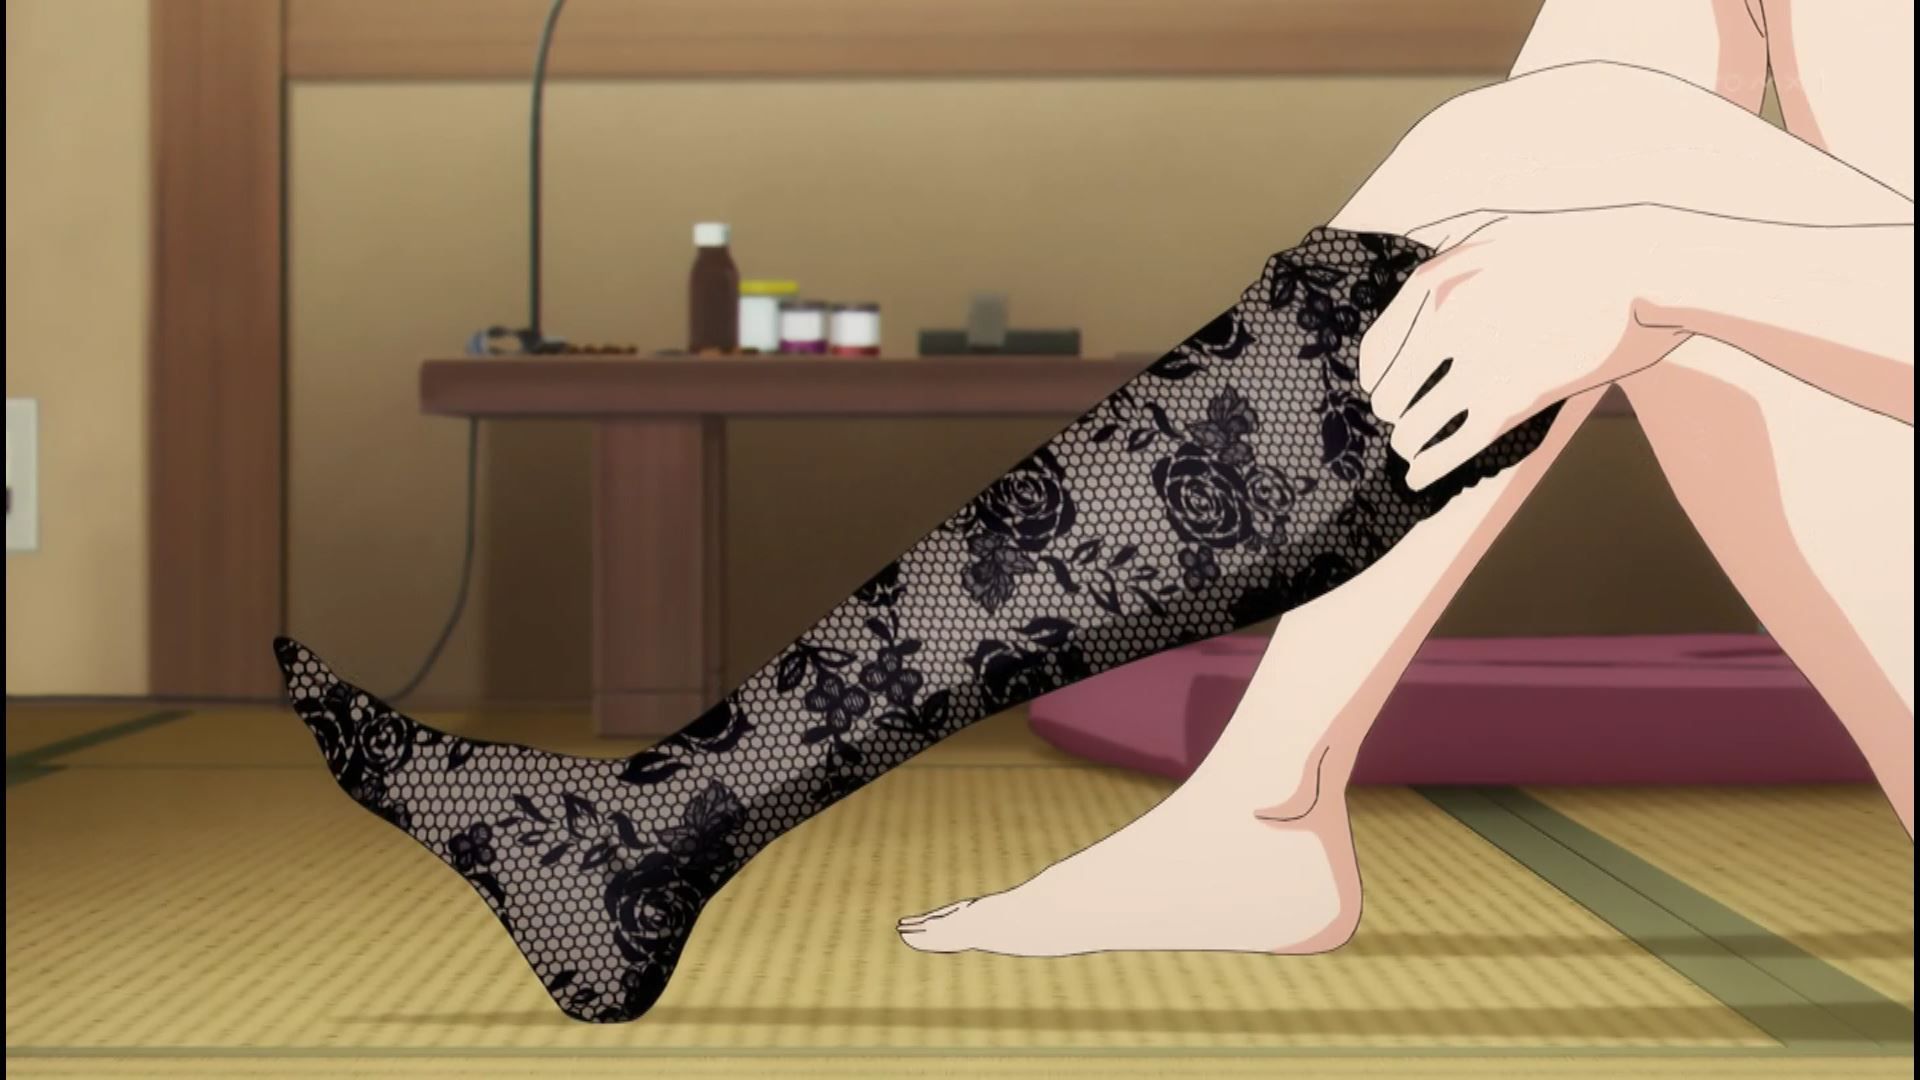 In the changing scene of episode 4 of the anime "That Dress-up Doll Falls in Love", pants and bra are fully visible! 9